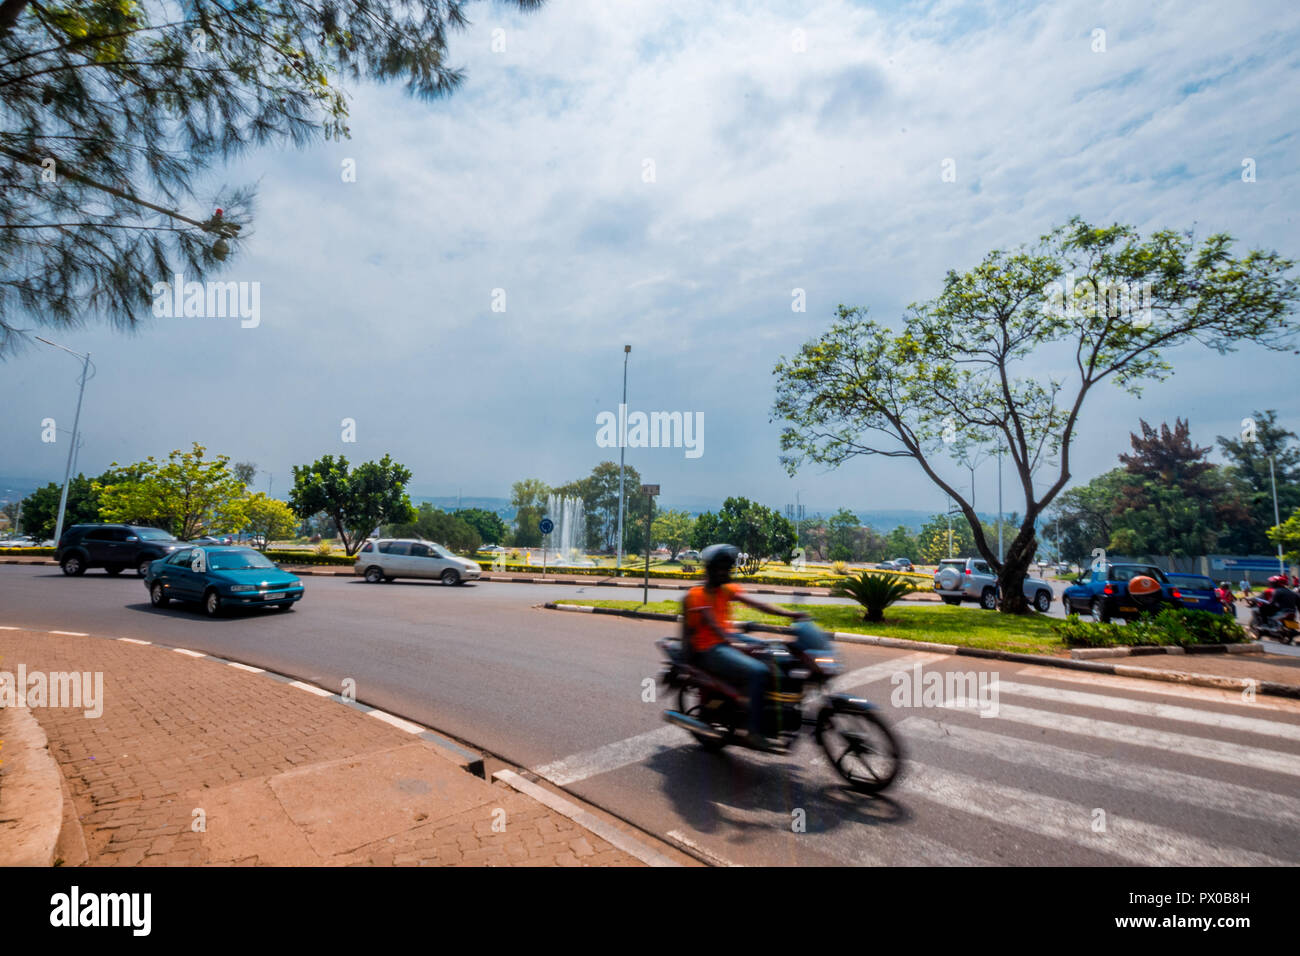 Kigali, Rwanda - September 20, 2018: the blur of a 'moto' (motorbike) passing by on a road near the city centre Stock Photo